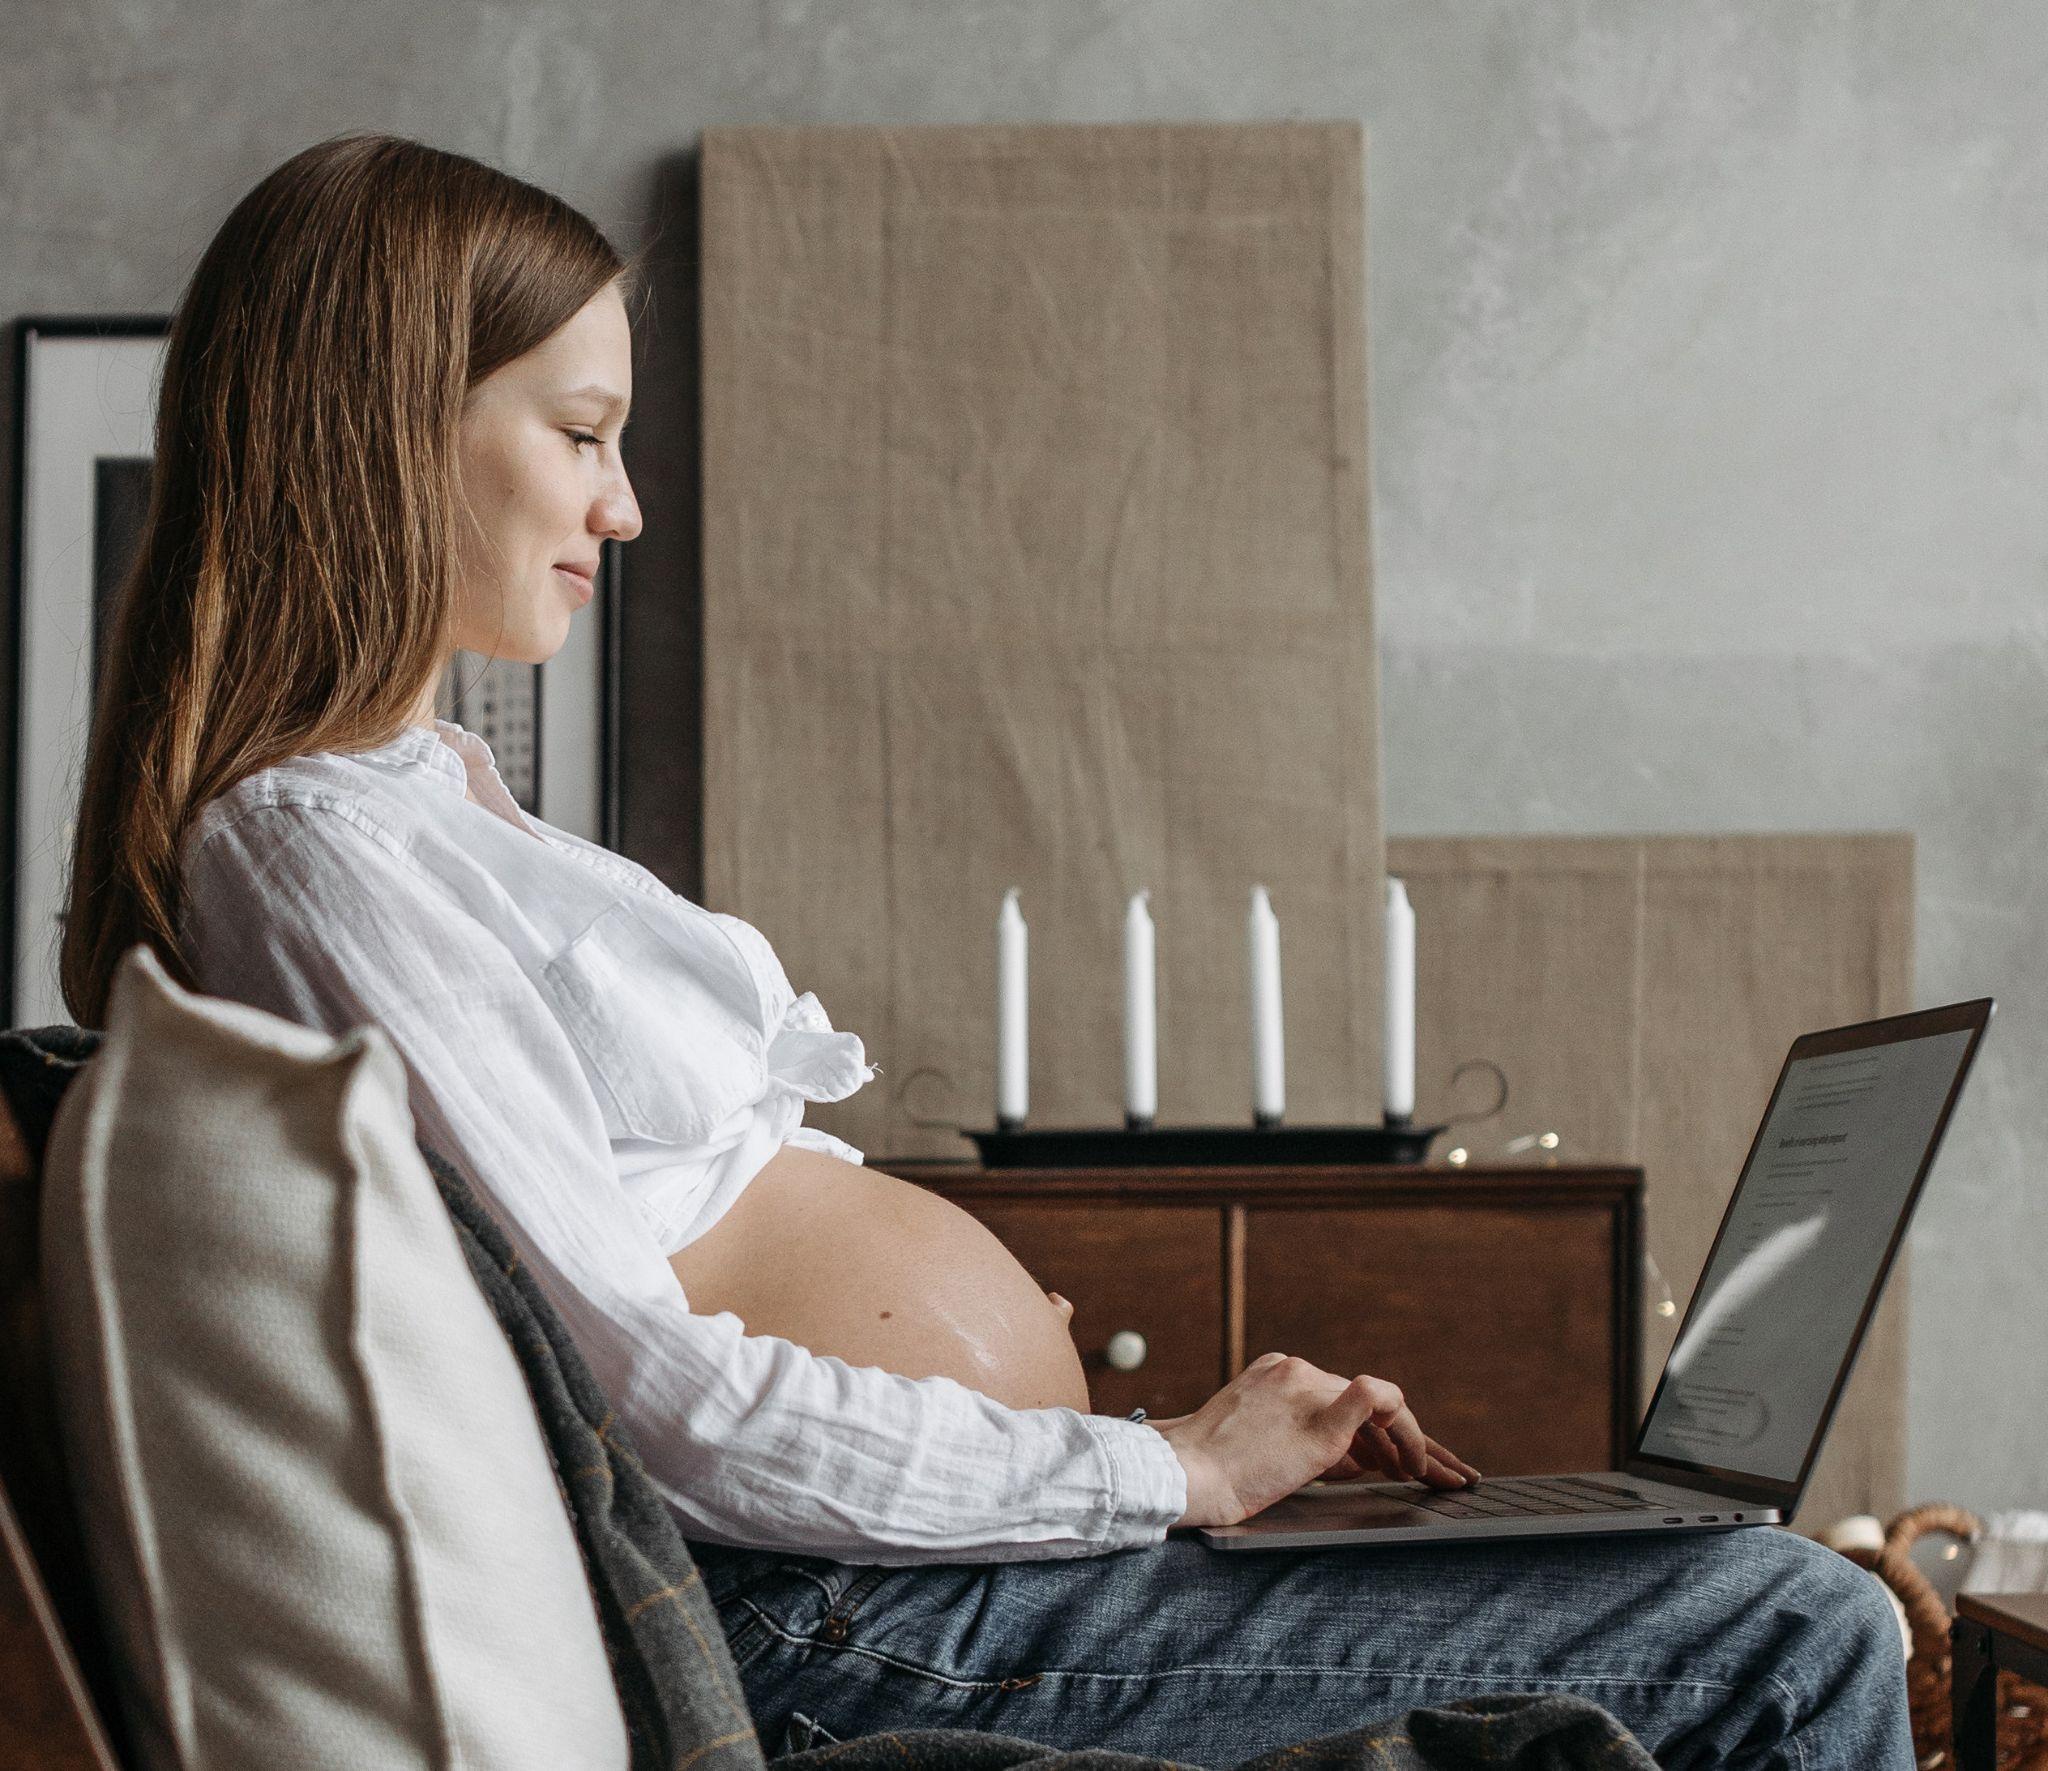 Picture of a pregnant woman sitting down with a laptop on her lap.